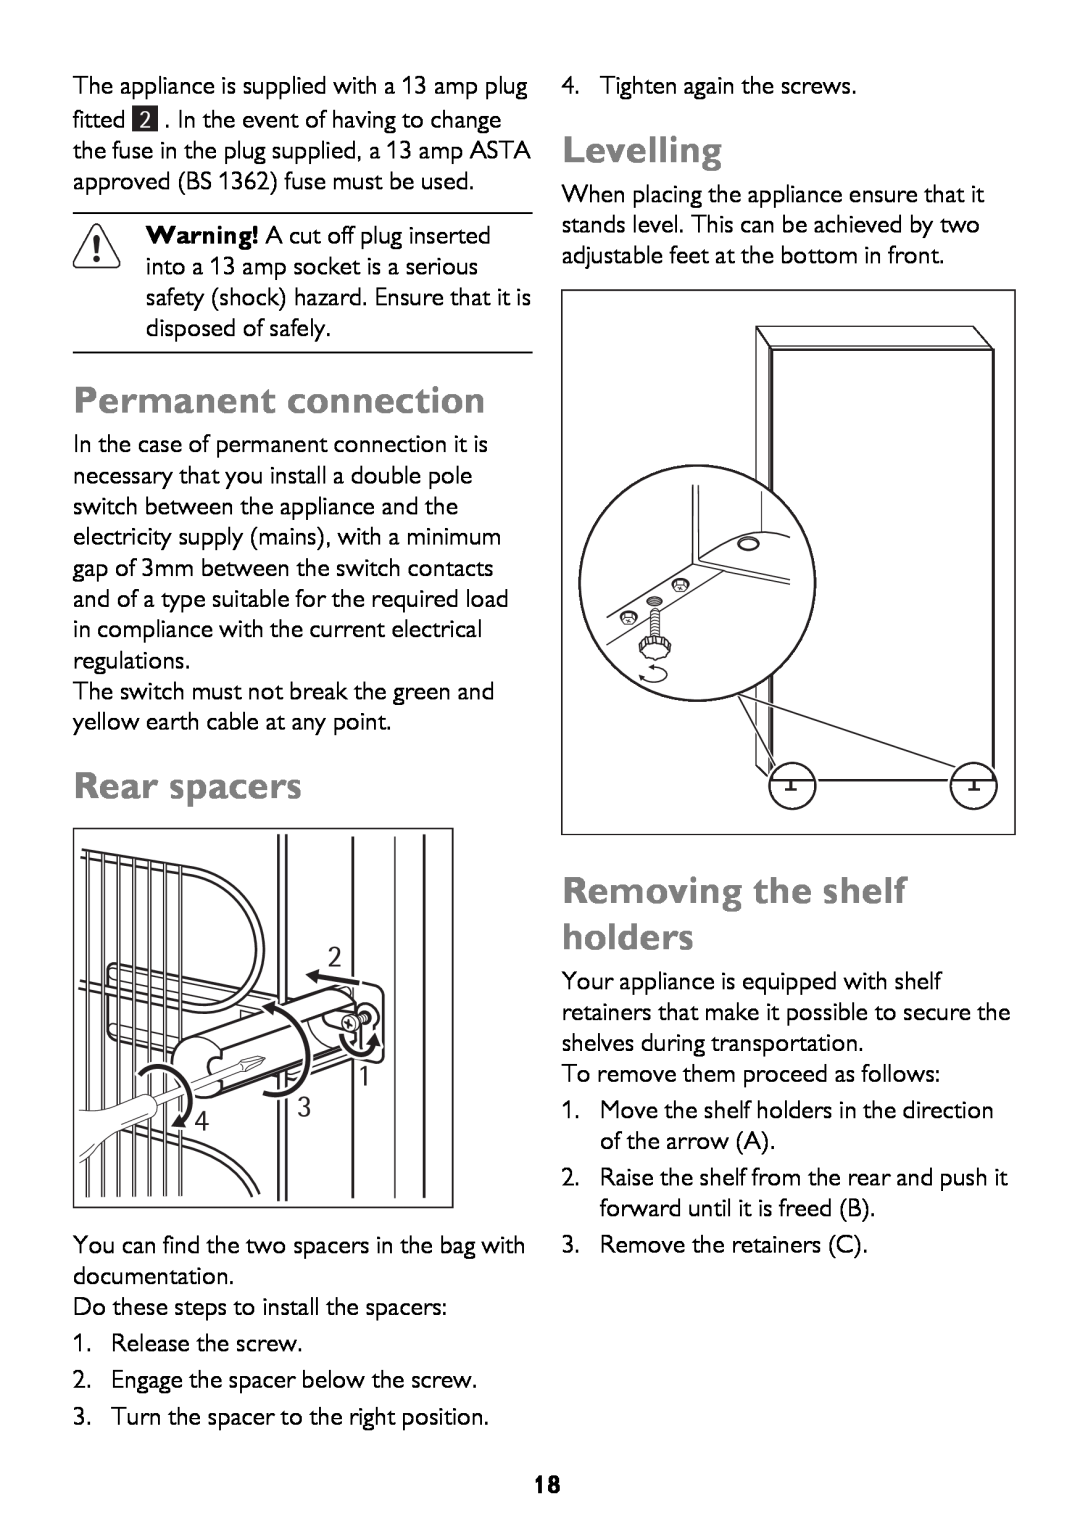 John Lewis JLFFIN175, JLFFW175 instruction manual Permanent connection, Rear spacers, Levelling, Removing the shelf holders 